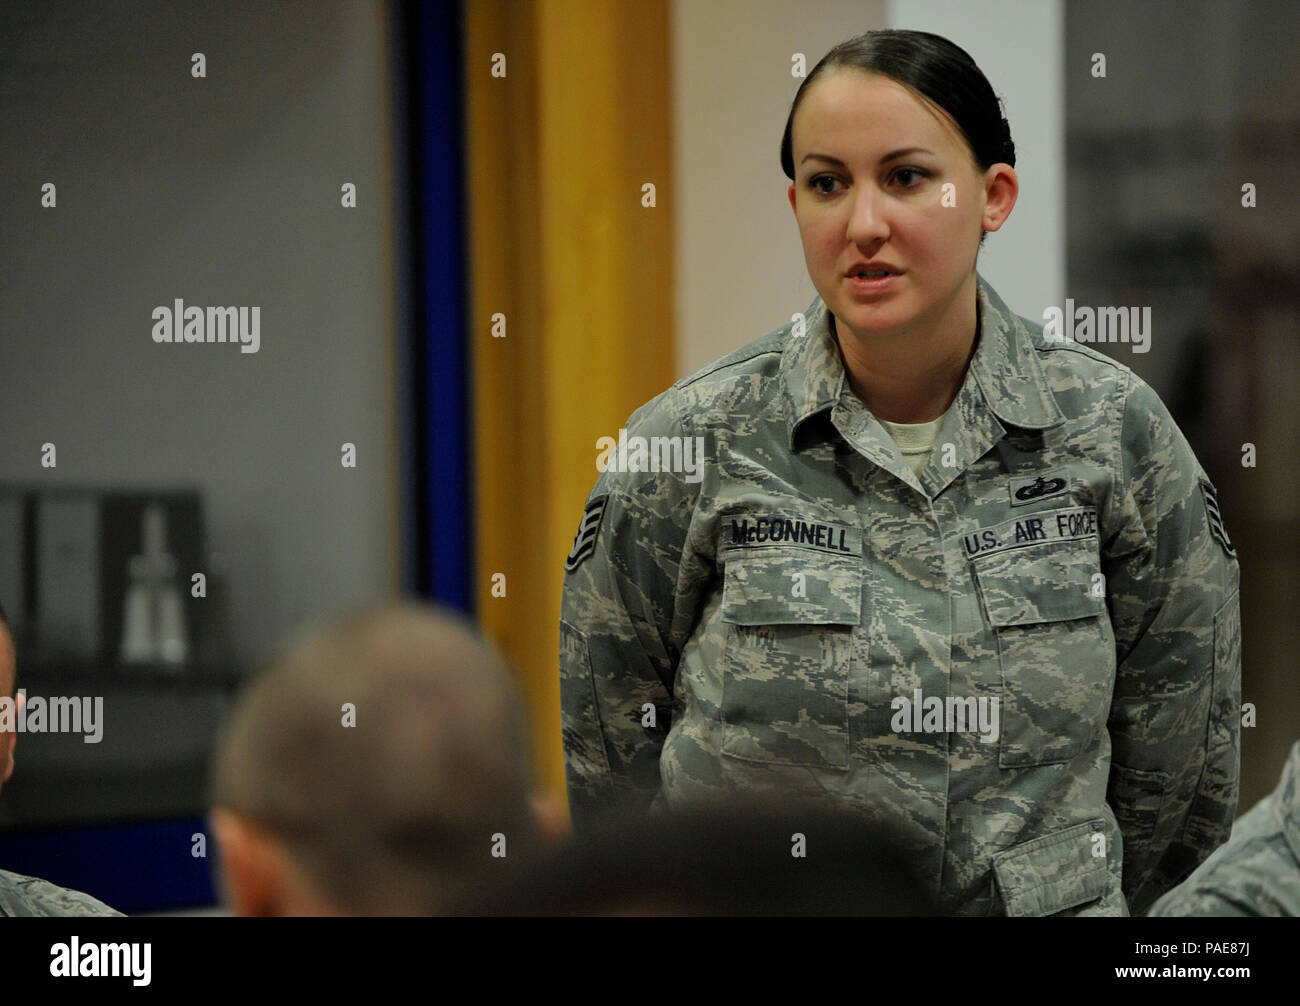 Staff Sgt. Kathleen McConnell, 700th Contracting Squadron contracting officer, asks a question during an enlisted breakfast with Chief Master Sgt. Phillip L. Easton, 86th Airlift Wing command chief, at Kapaun Air Station, Germany. McConnell asked Easton about how to become a better supervisor and encourage Airmen to take initiative. (U.S. Air Force photo/Airman 1st Class Larissa Greatwood) Stock Photo